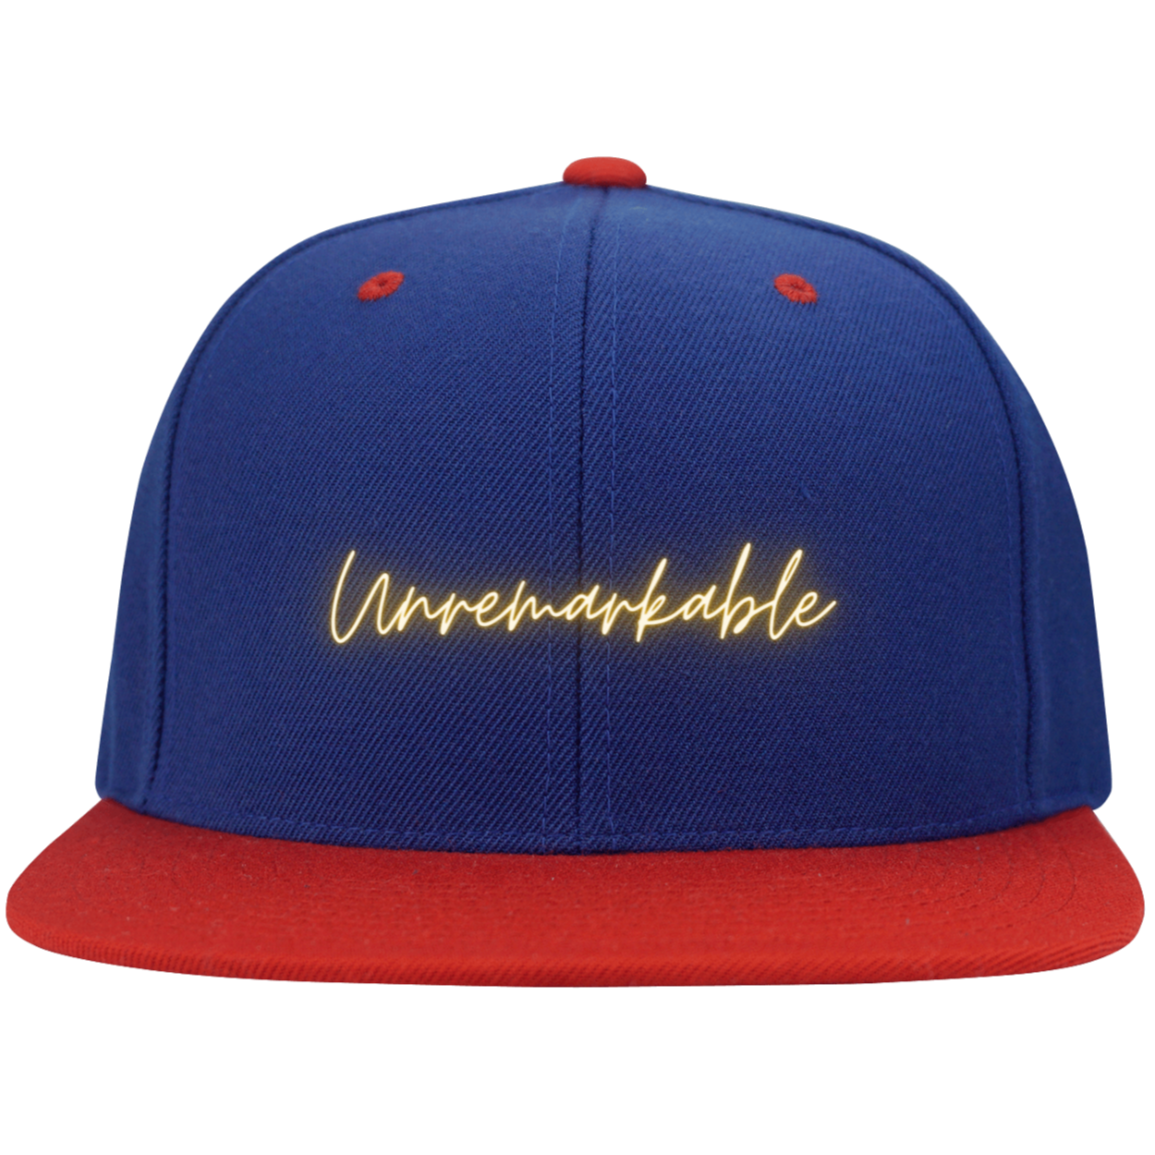 Unremarkable  Embroidered Flat Bill High-Profile Snapback Hat